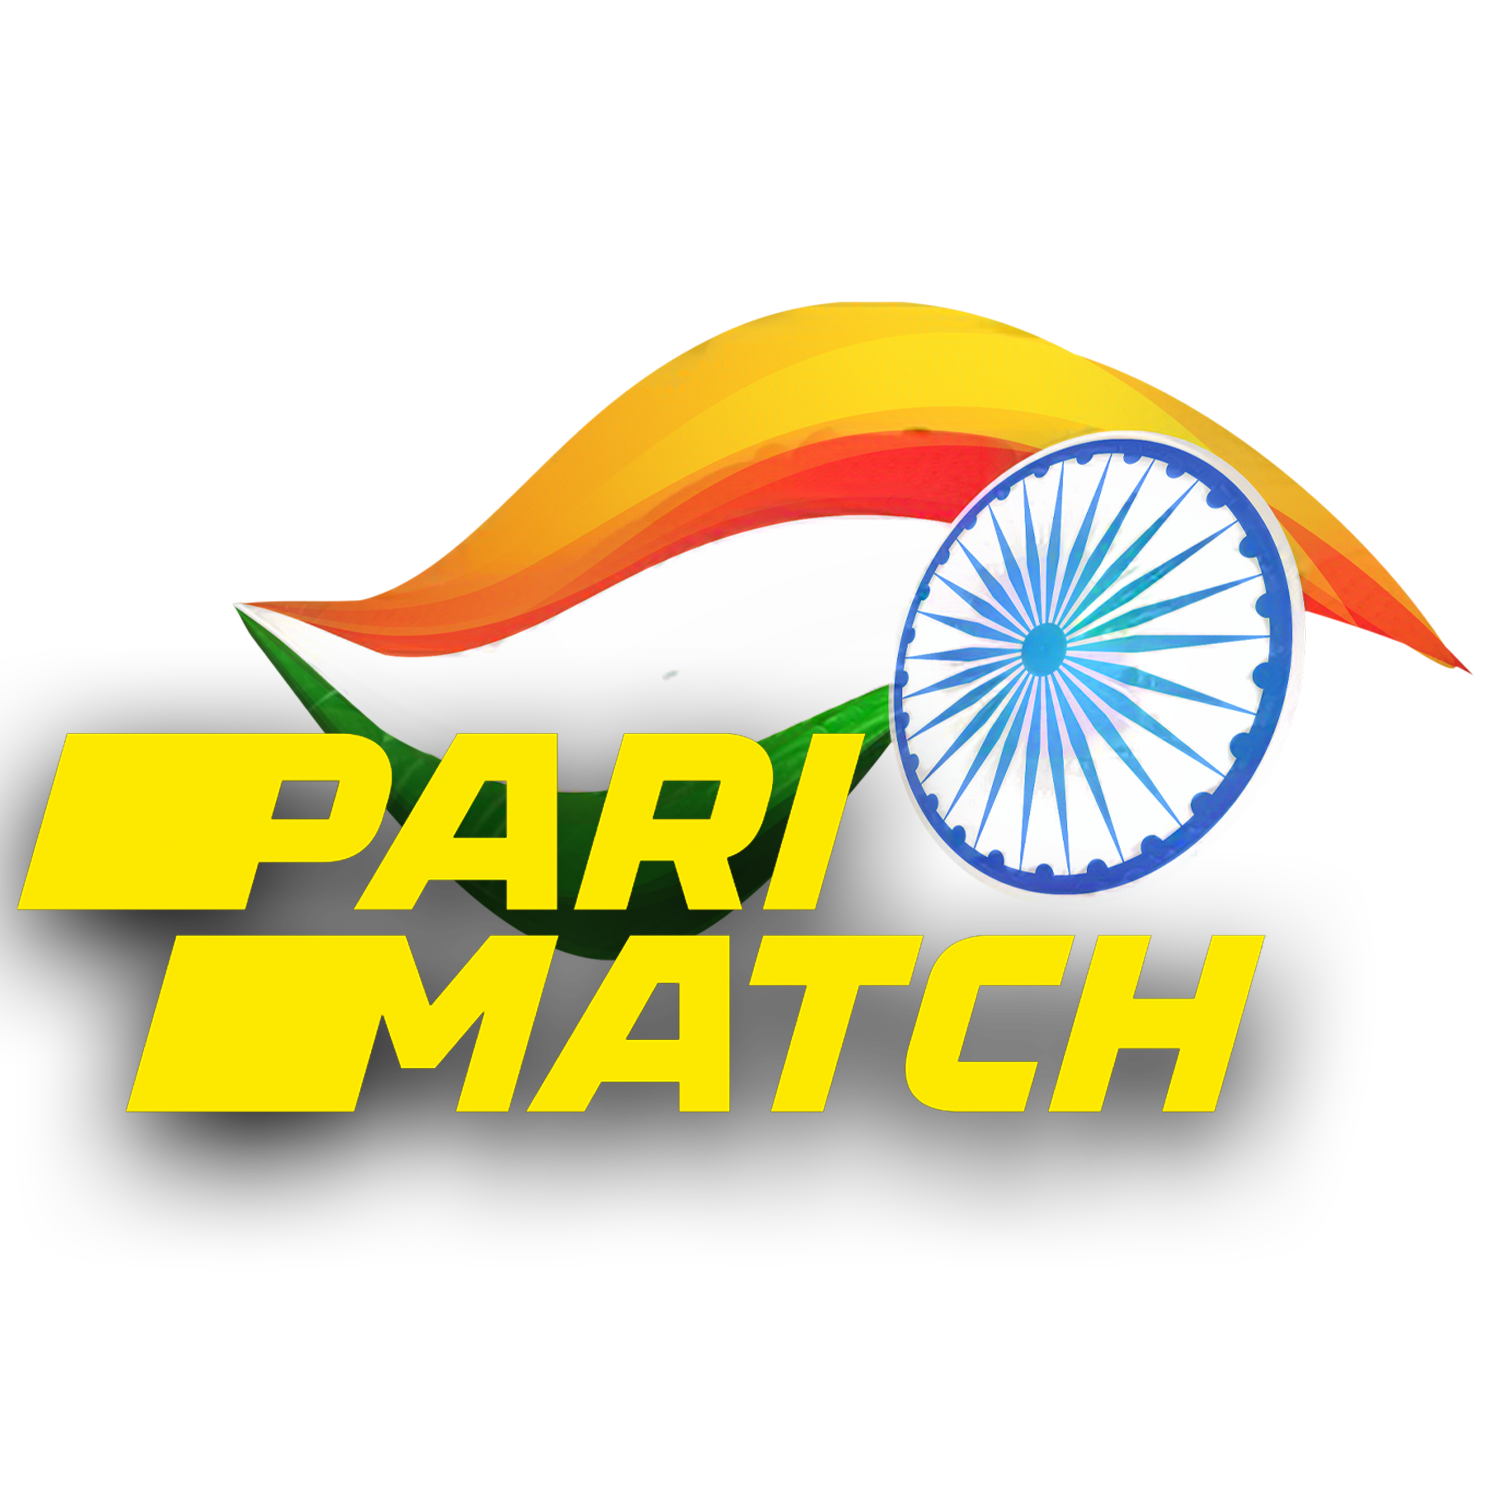 Parimatch is a well-known international bookmaker office where you can place bets on sports and esports events.